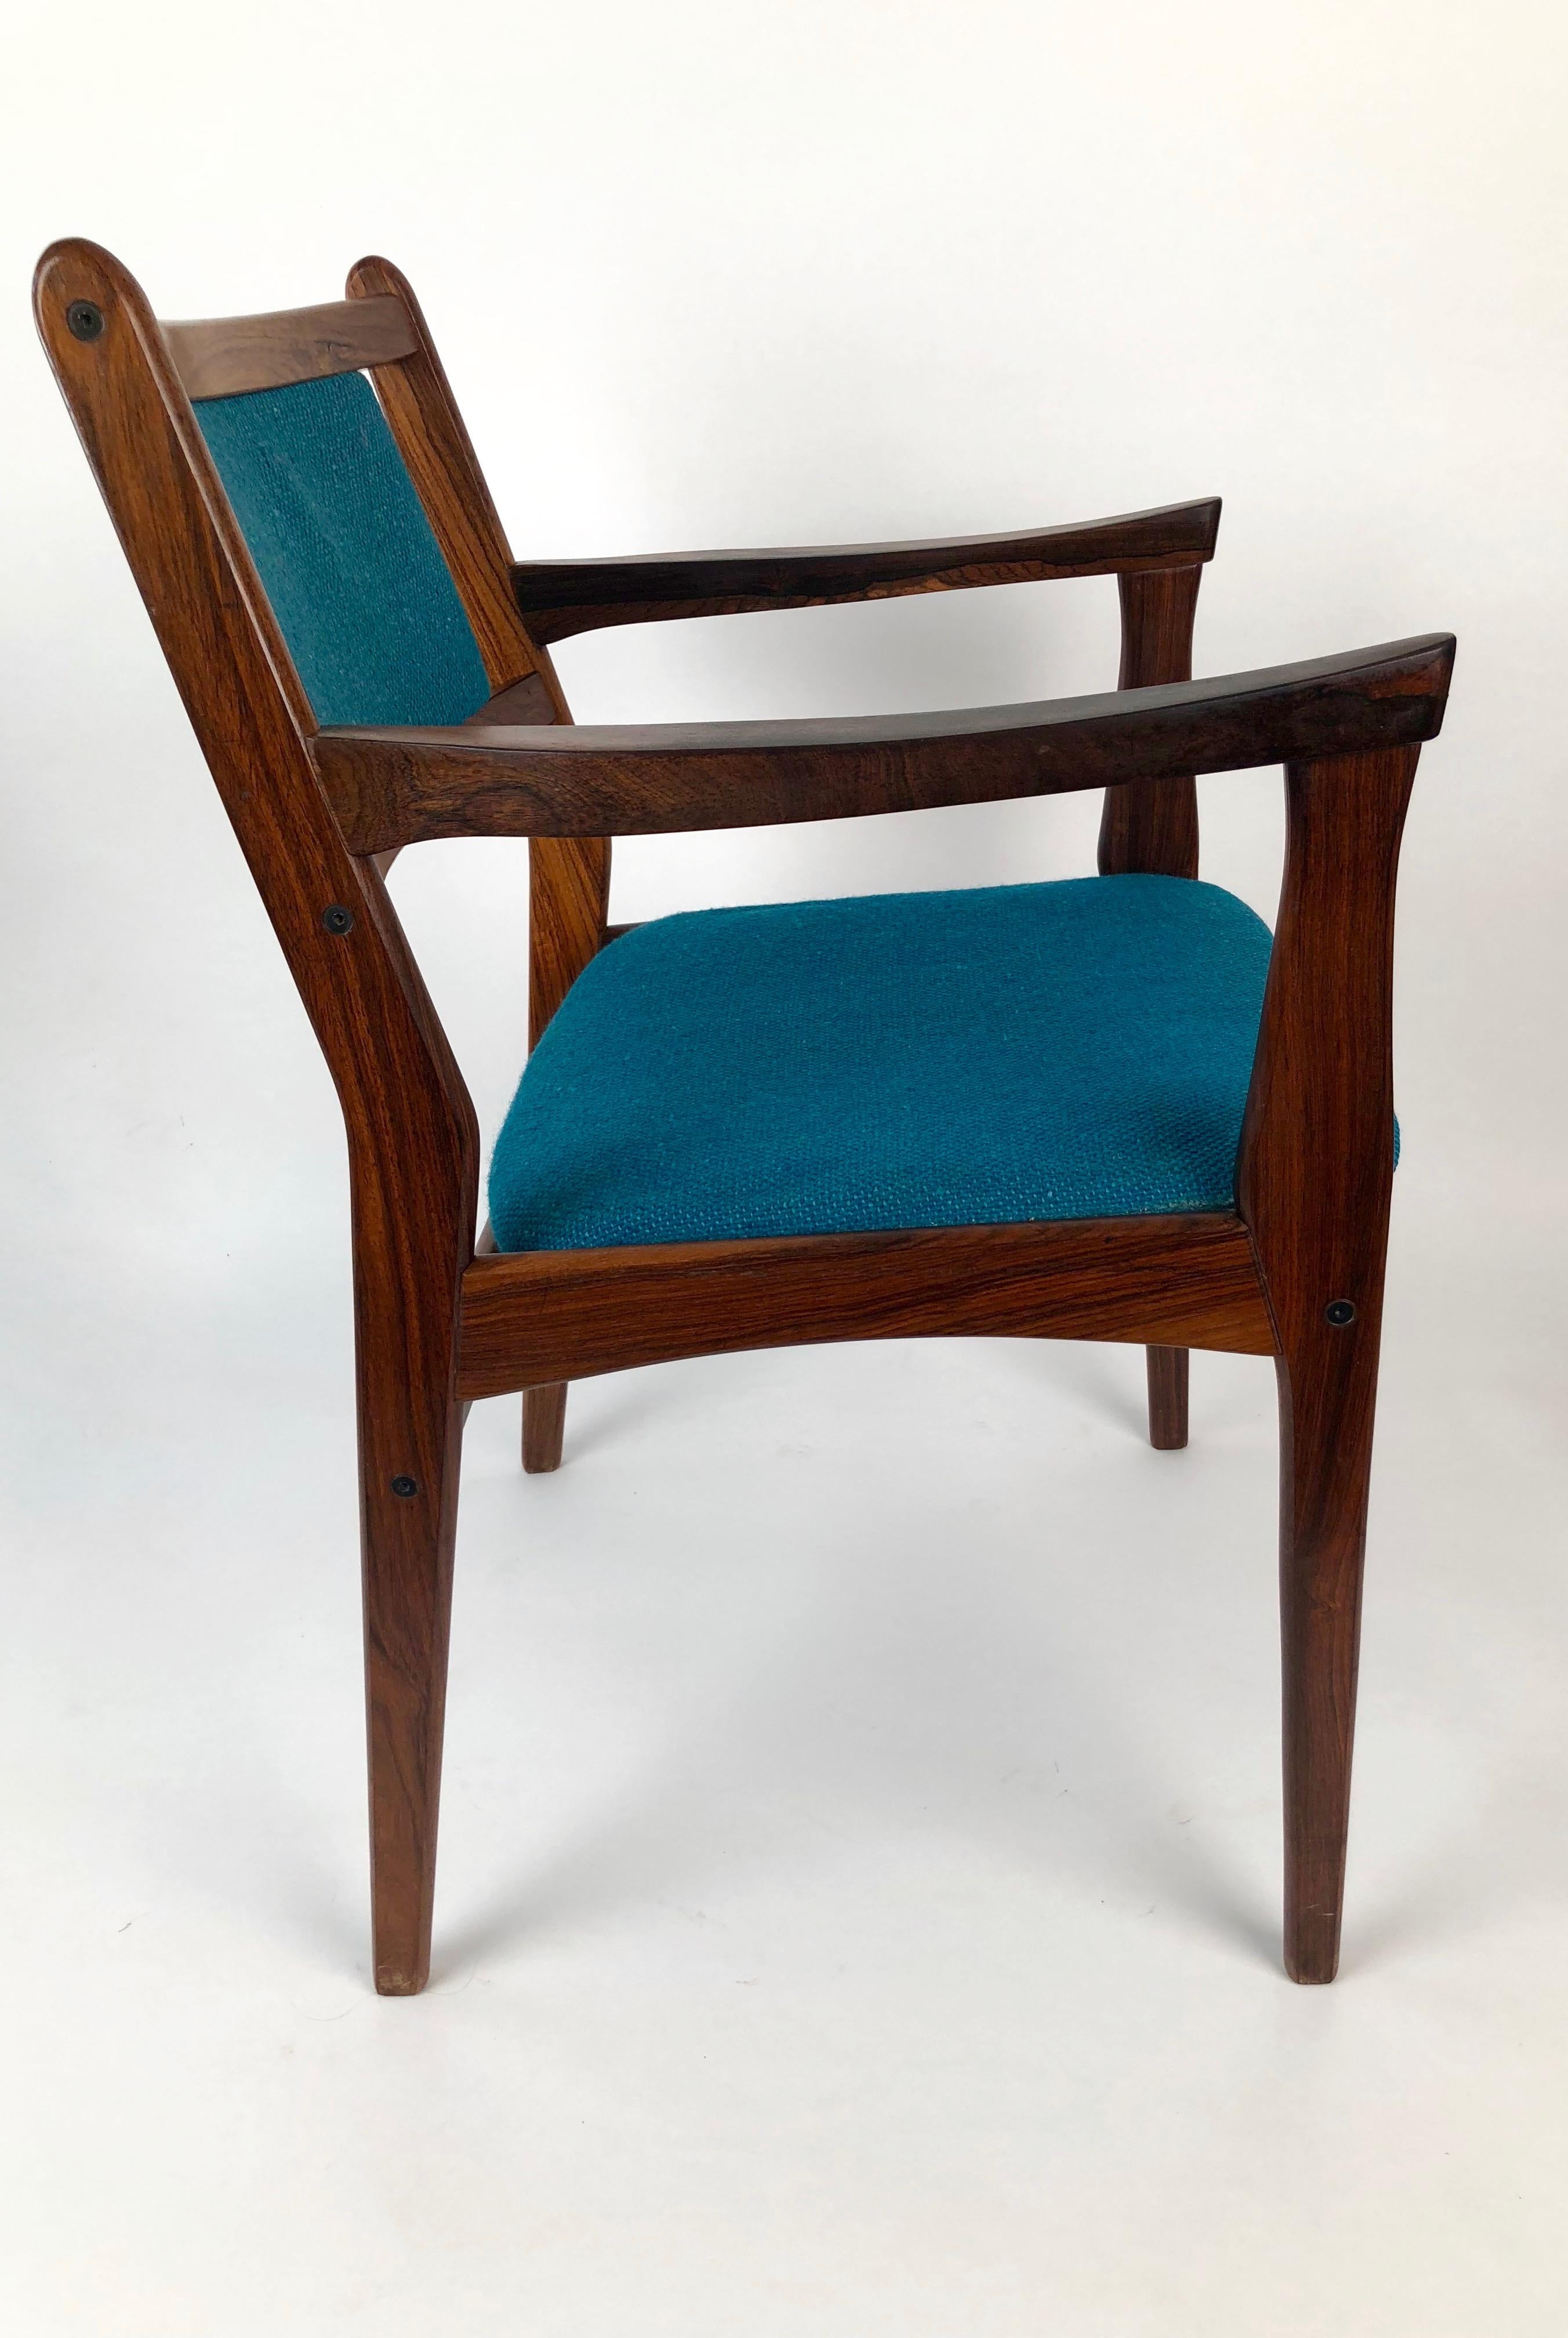 Set of Two Palisander Chairs with Turquoise Fabric from the 1960s For Sale 5